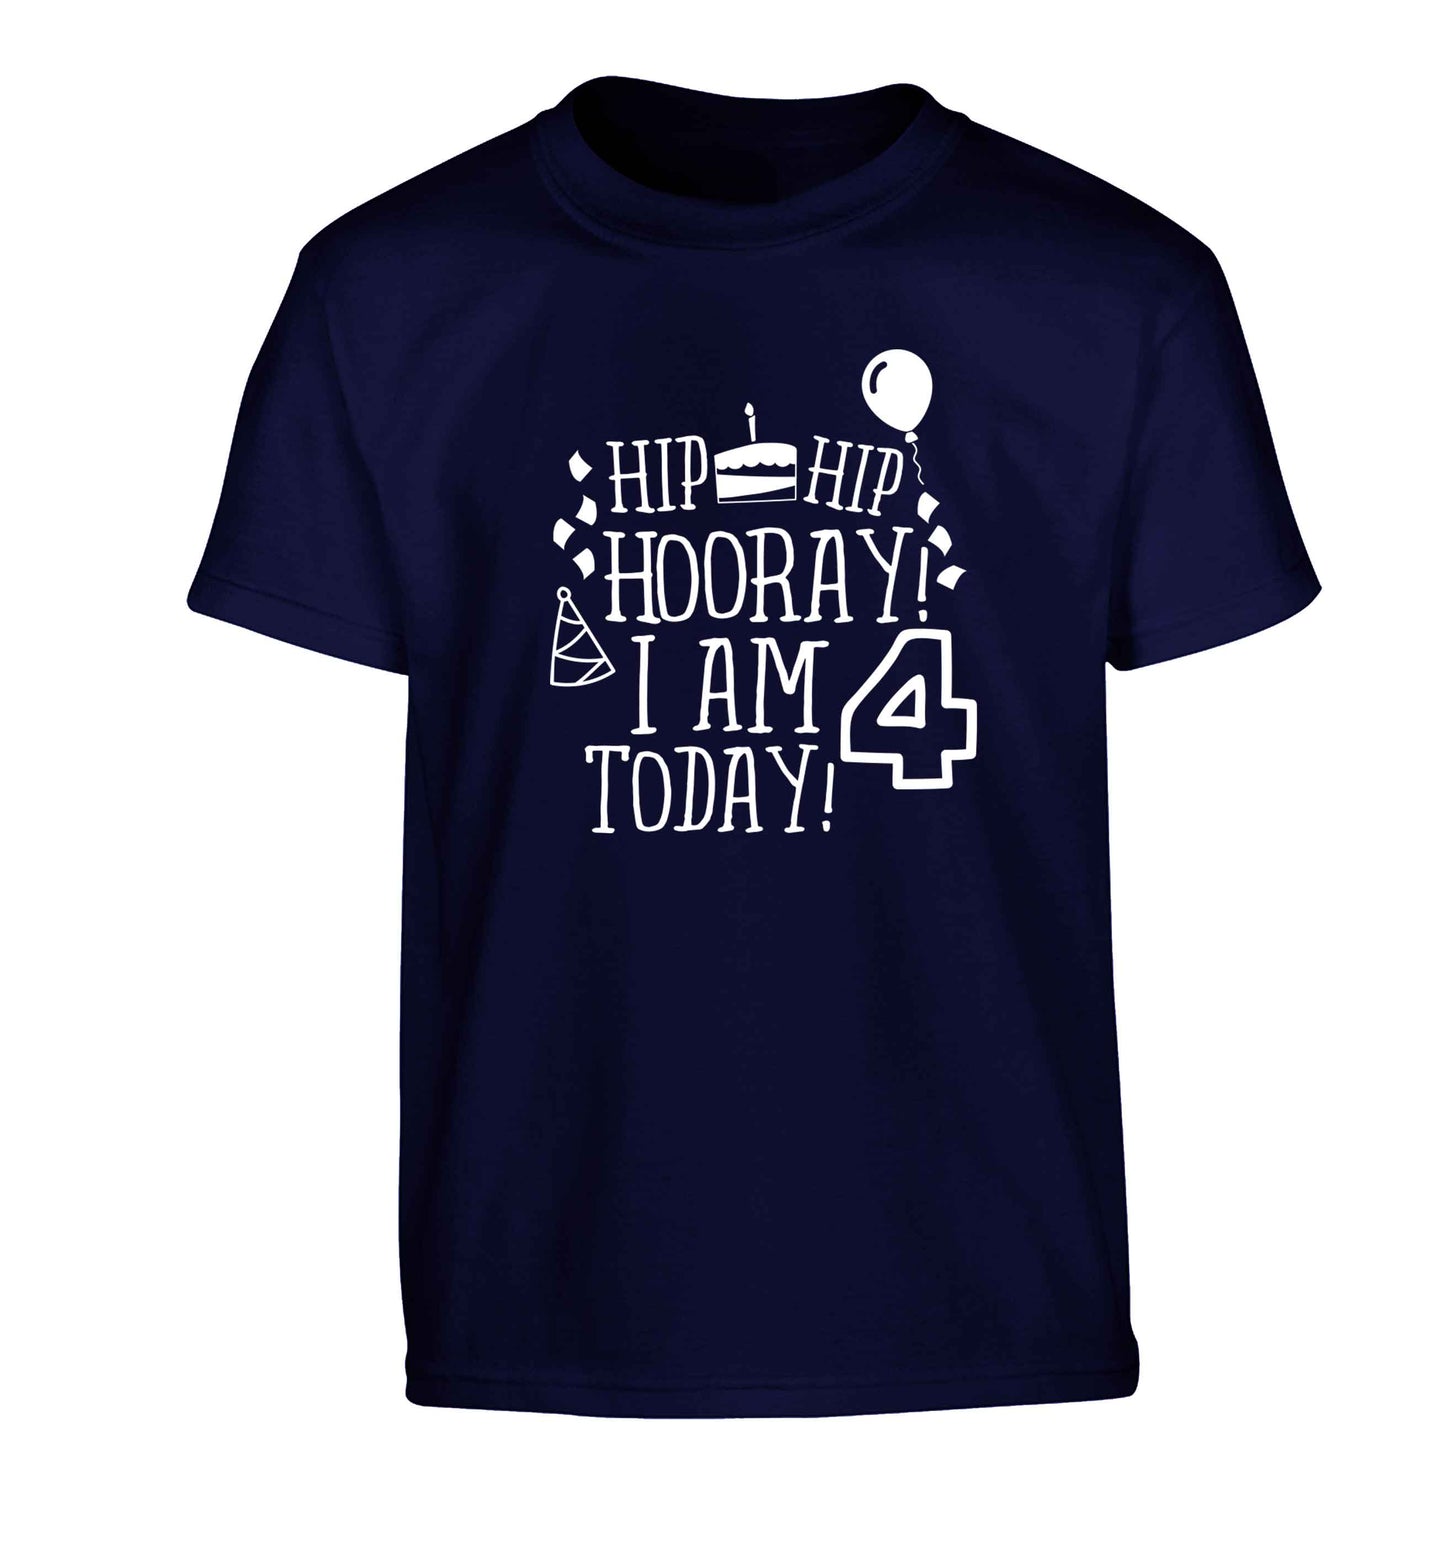 Hip hip hooray I am four today! Children's navy Tshirt 12-13 Years